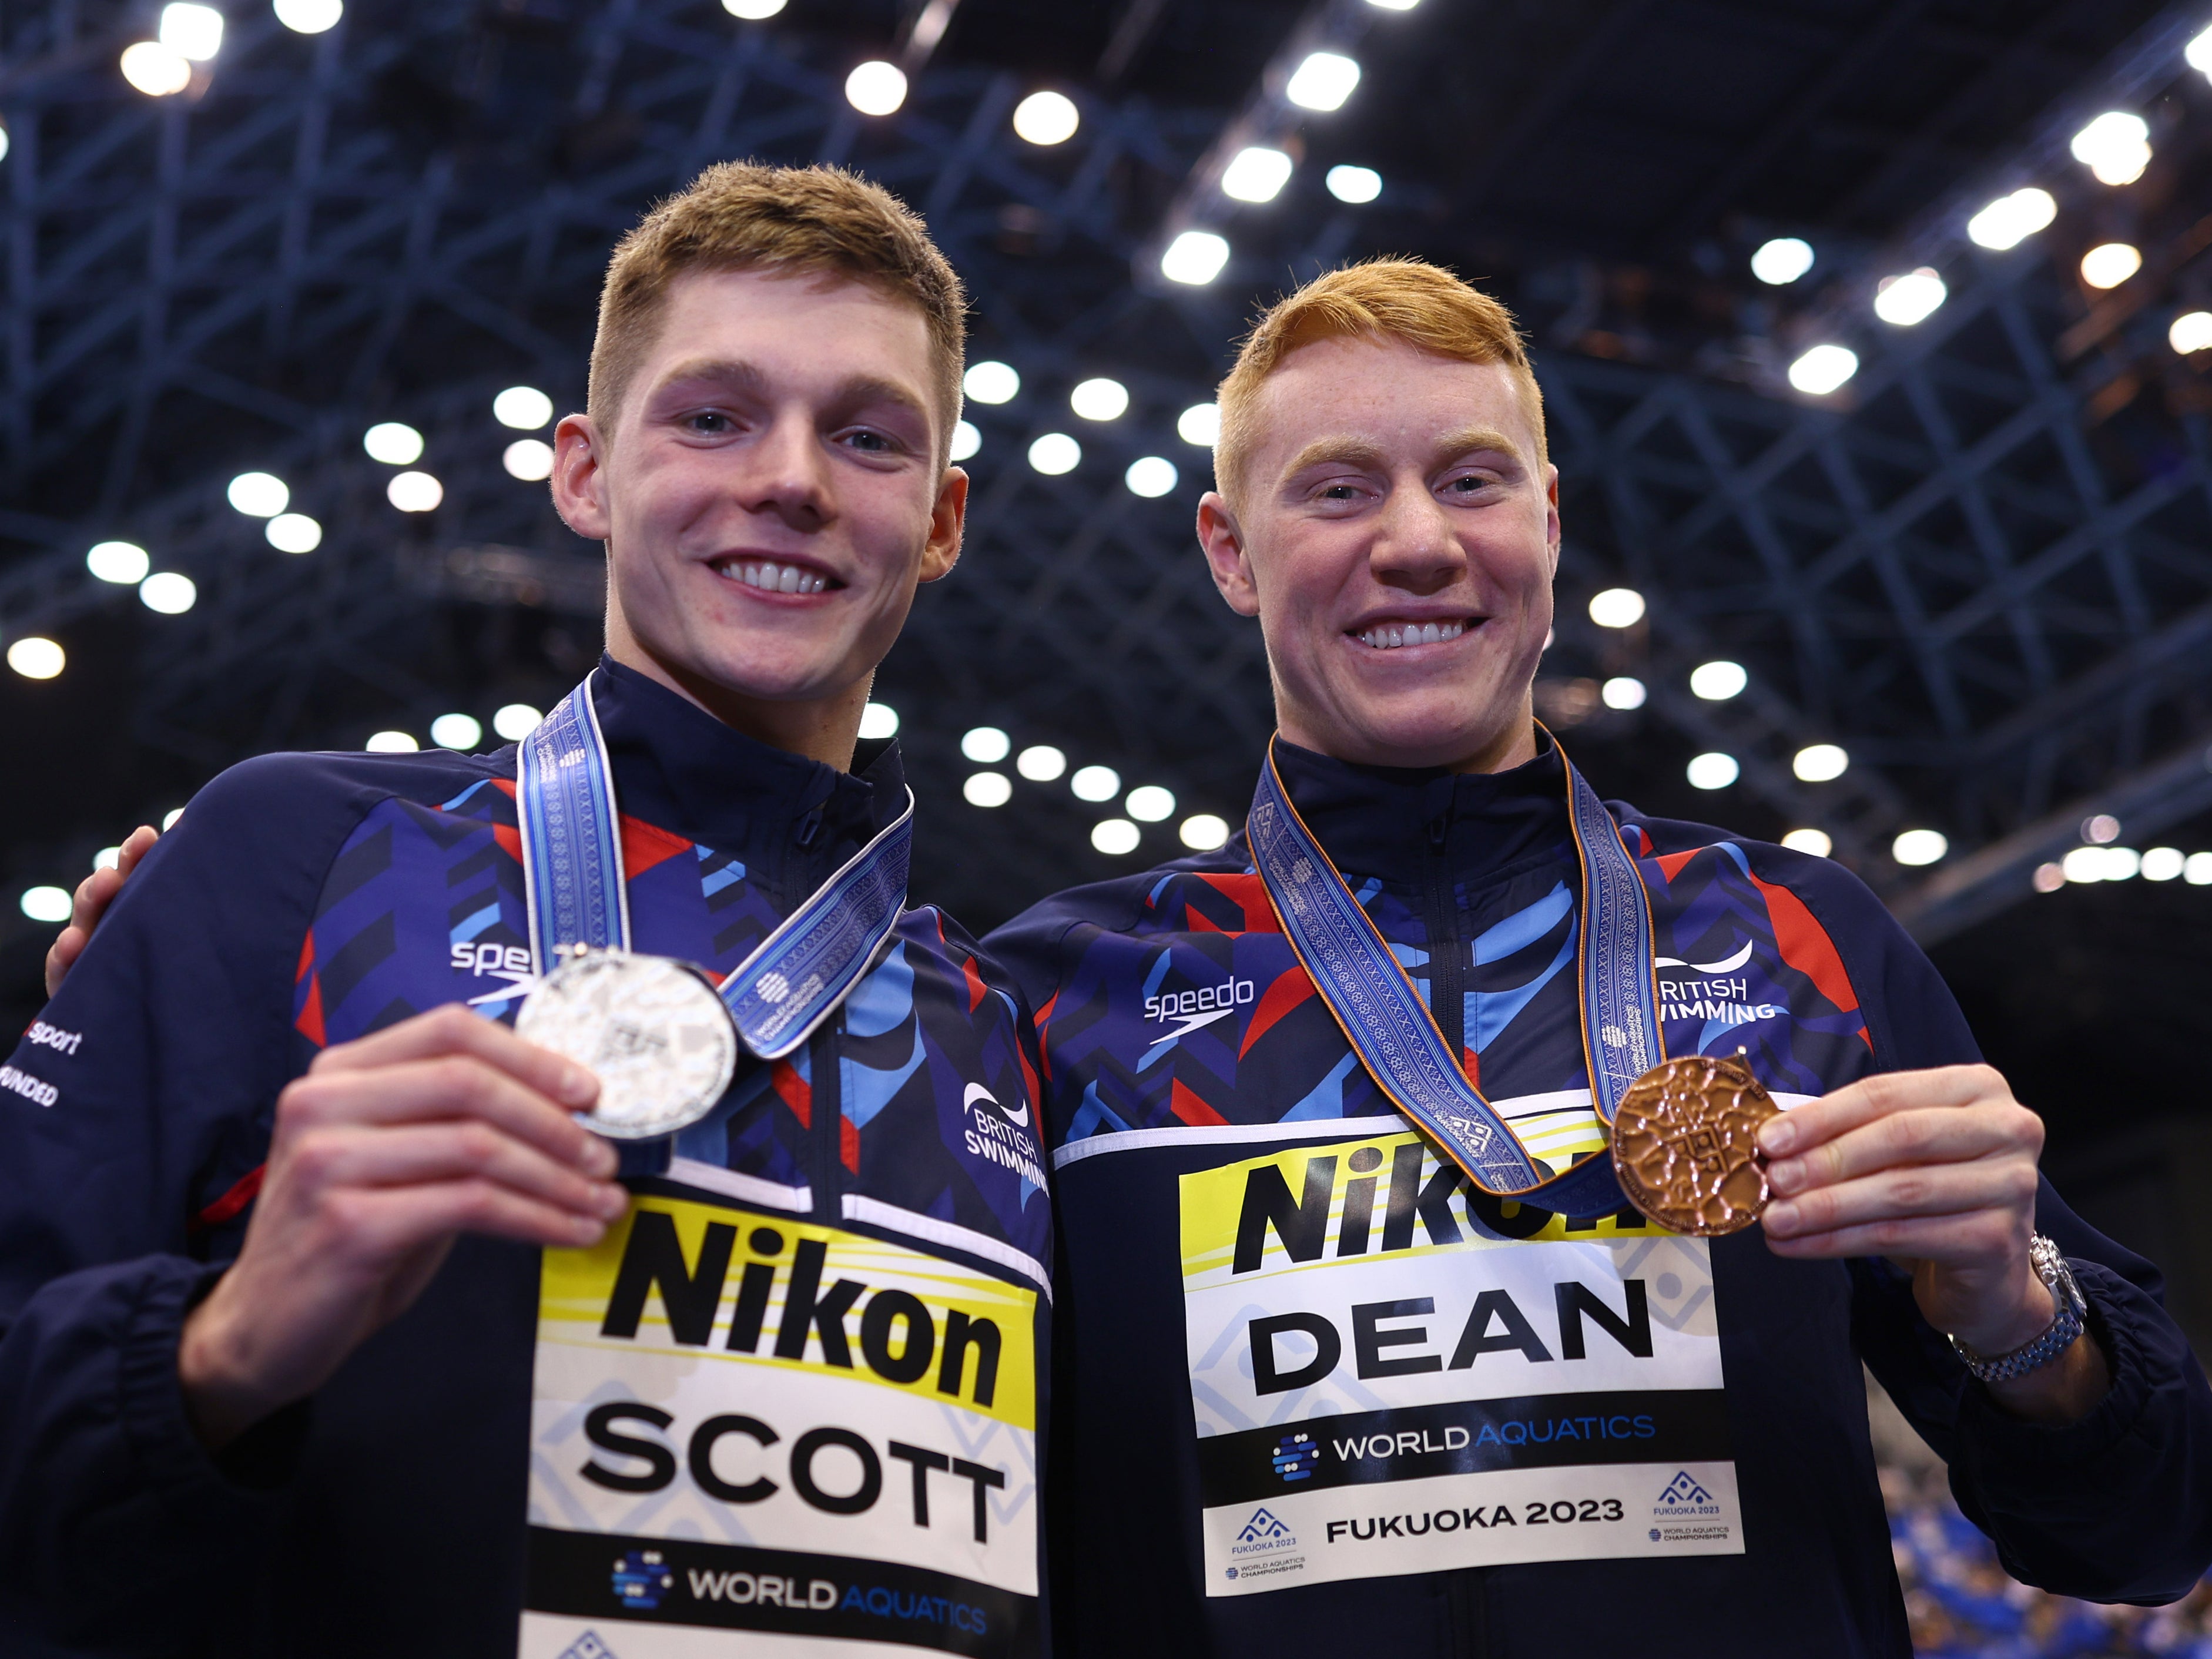 Duncan Scott and Tom Dean took silver and bronze in the 200m IM at the World Aquatics Championship